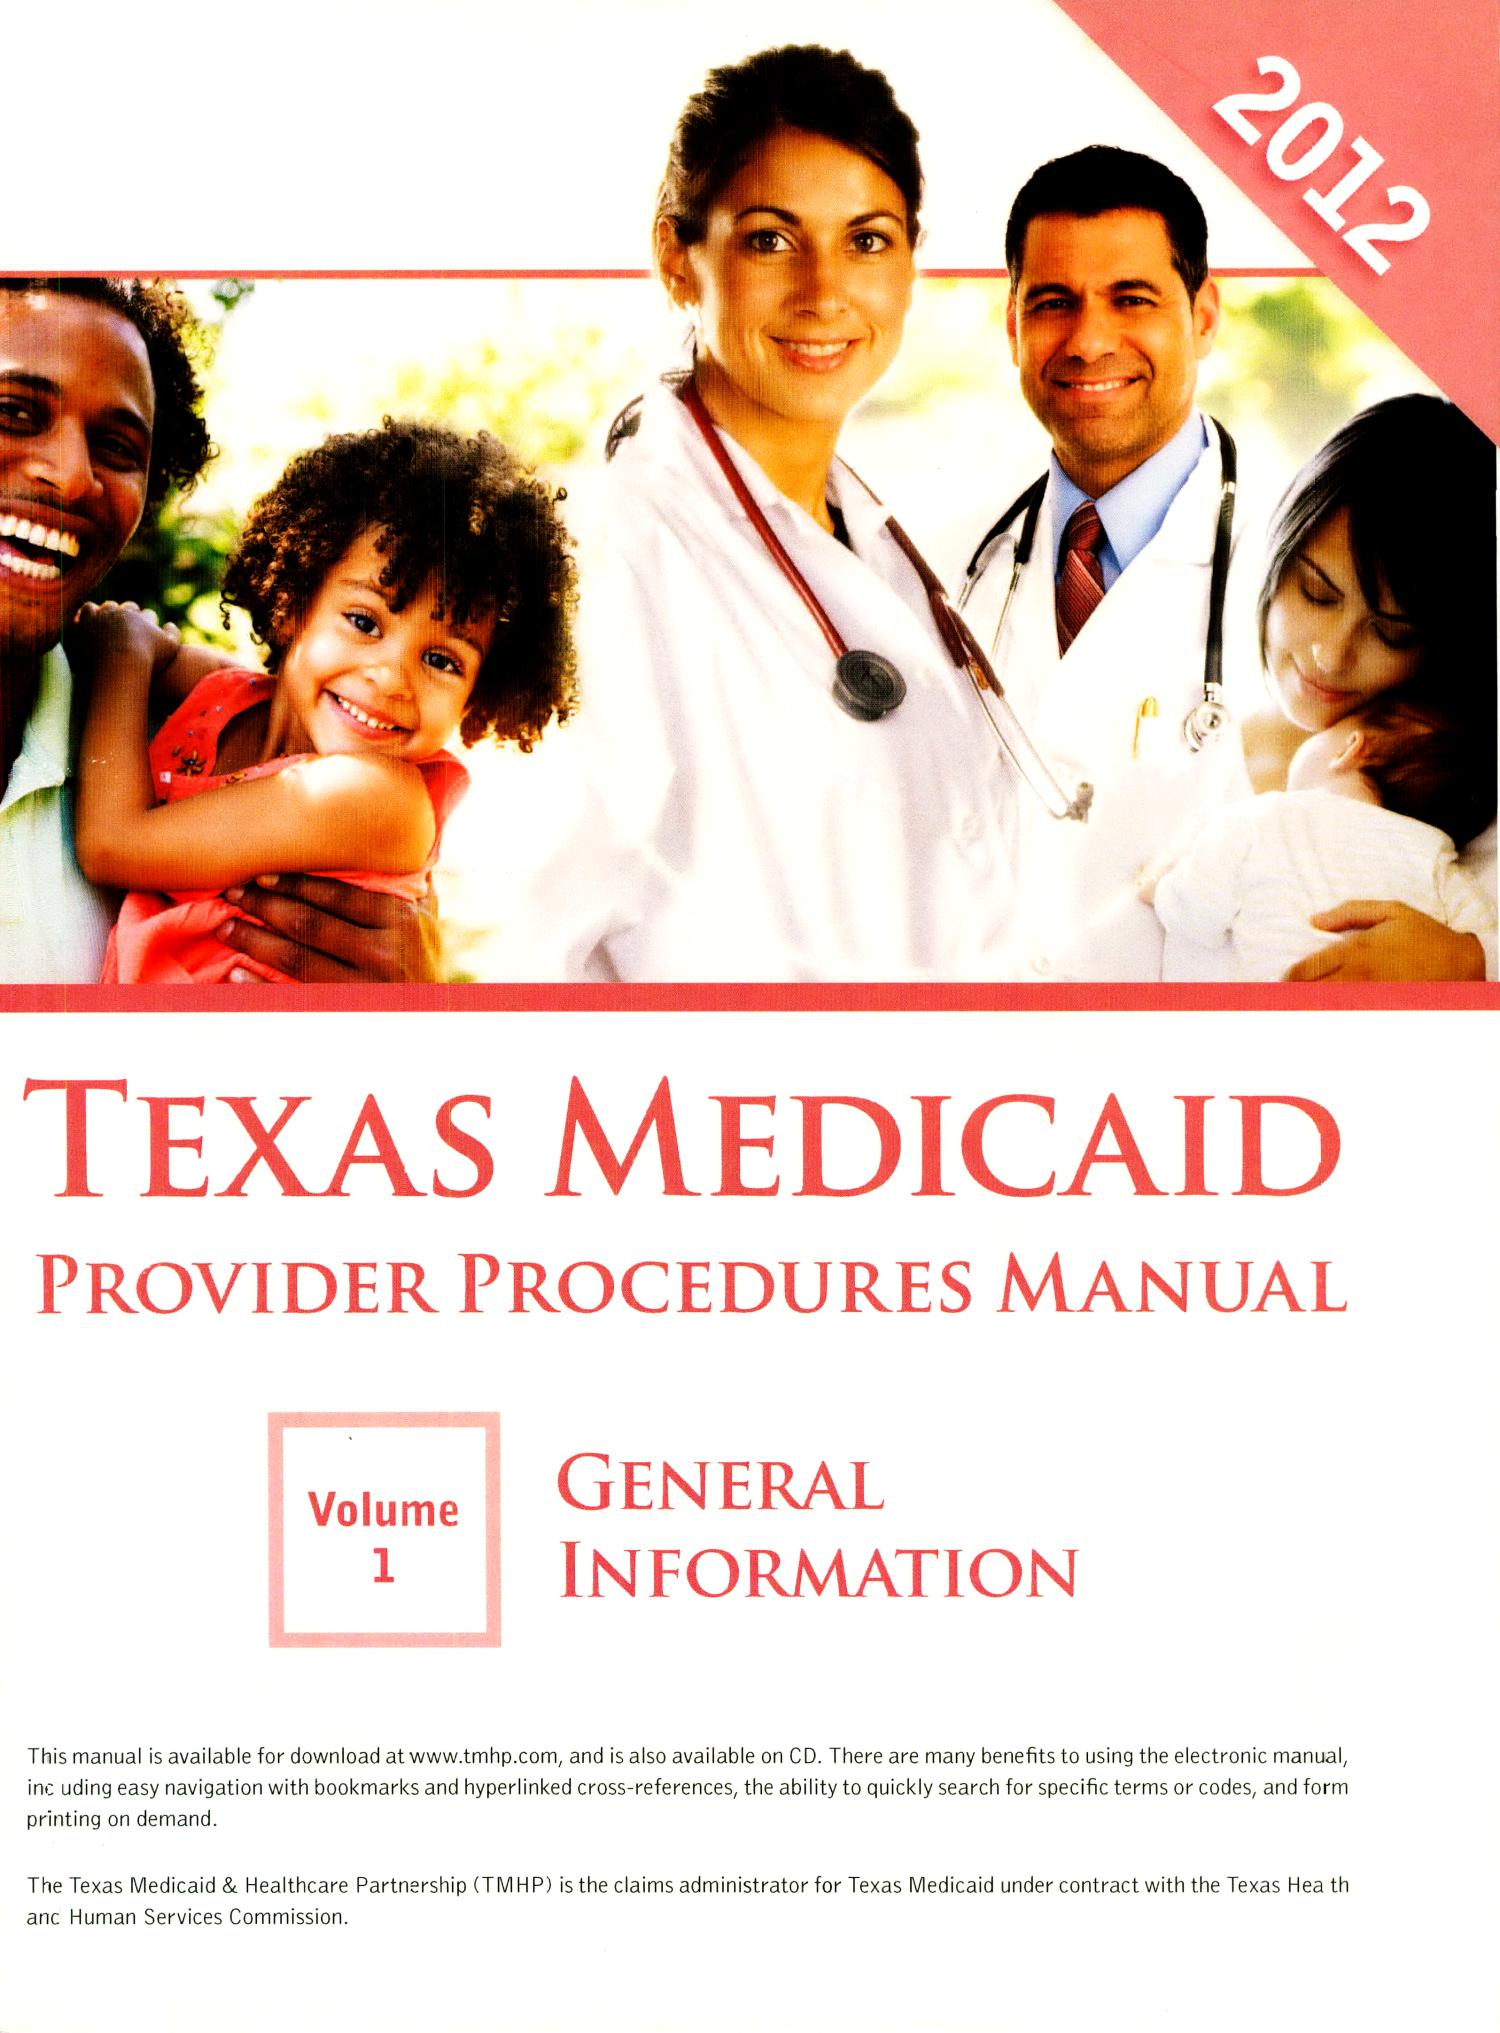 Texas Medicaid Provider Procedures Manual: Volume 1, General Information
                                                
                                                    Front Cover
                                                